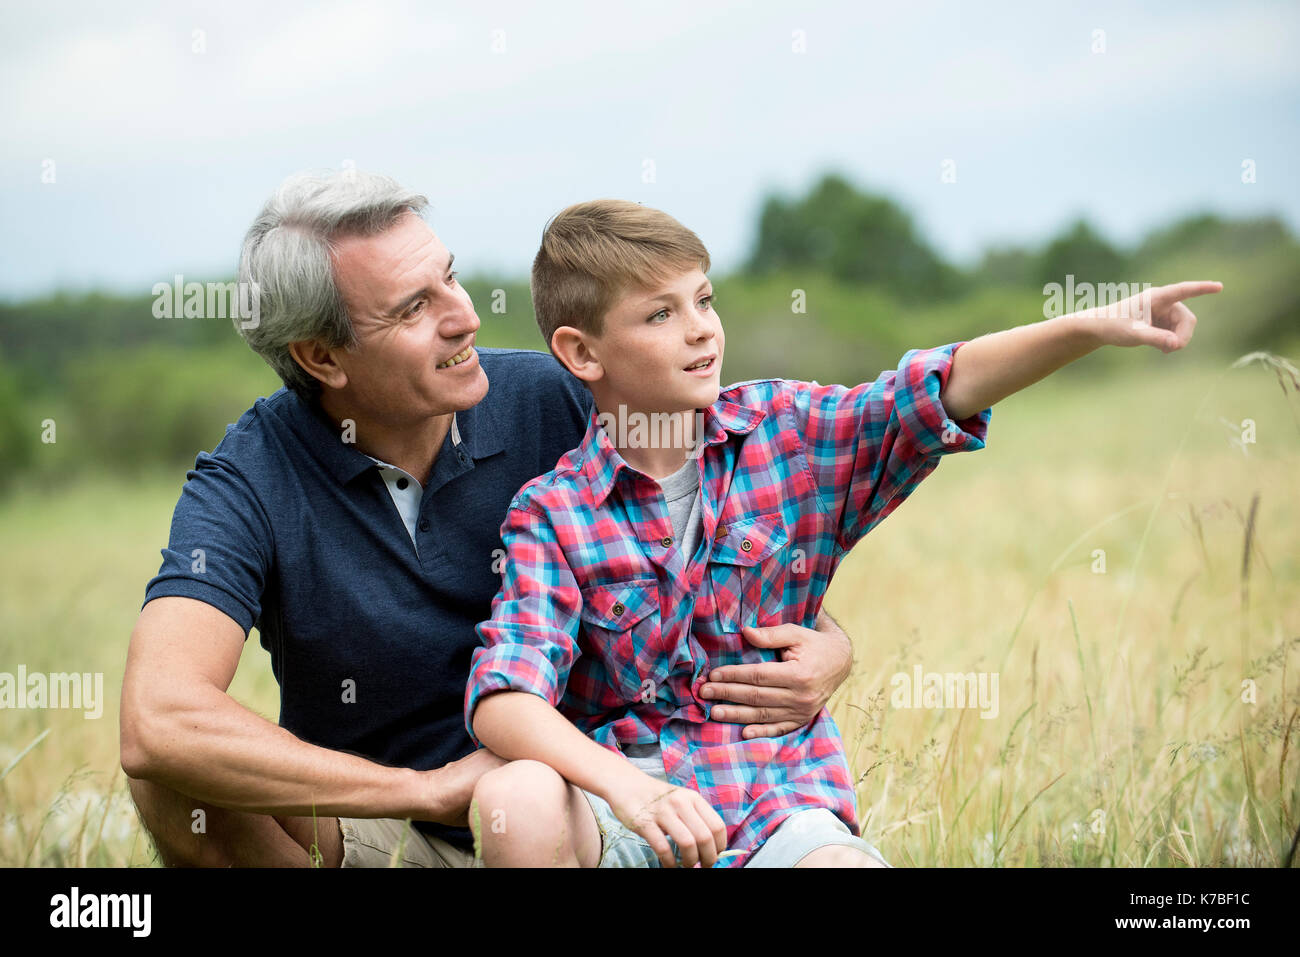 Grandfather and grandson spending time together outdoors Stock Photo